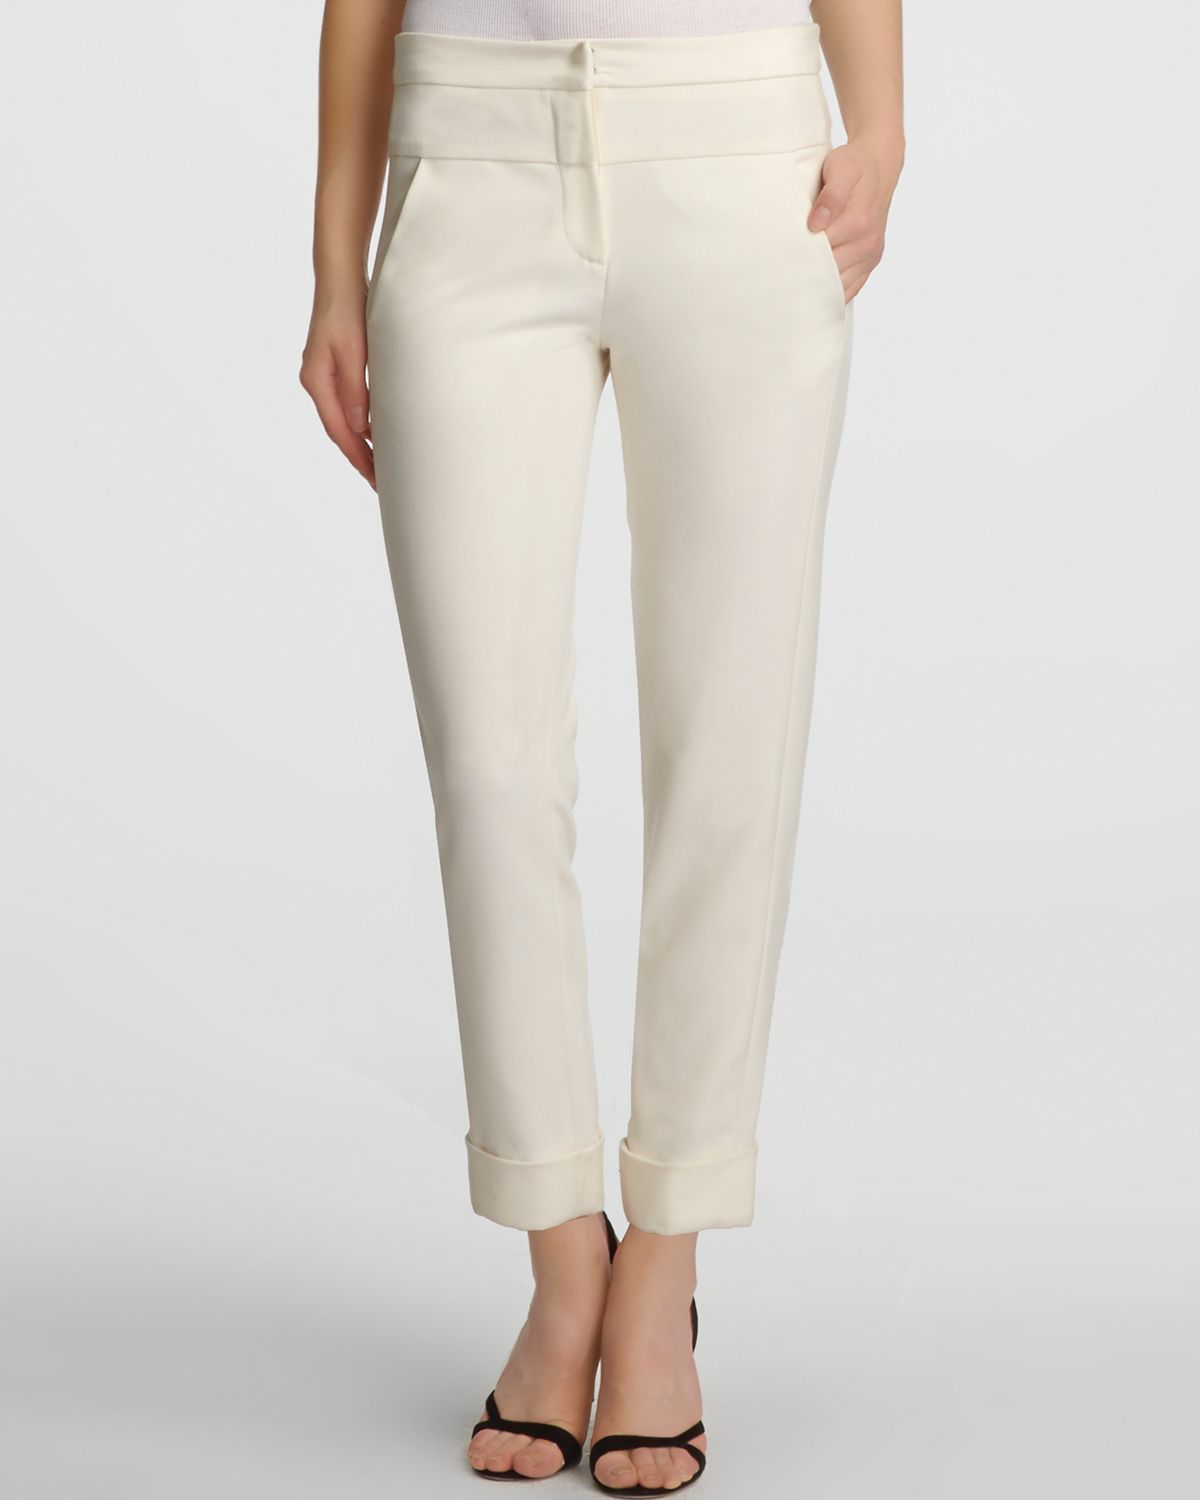 Lyst - Halston Ankle Length Cuffed Skinny Pants in White